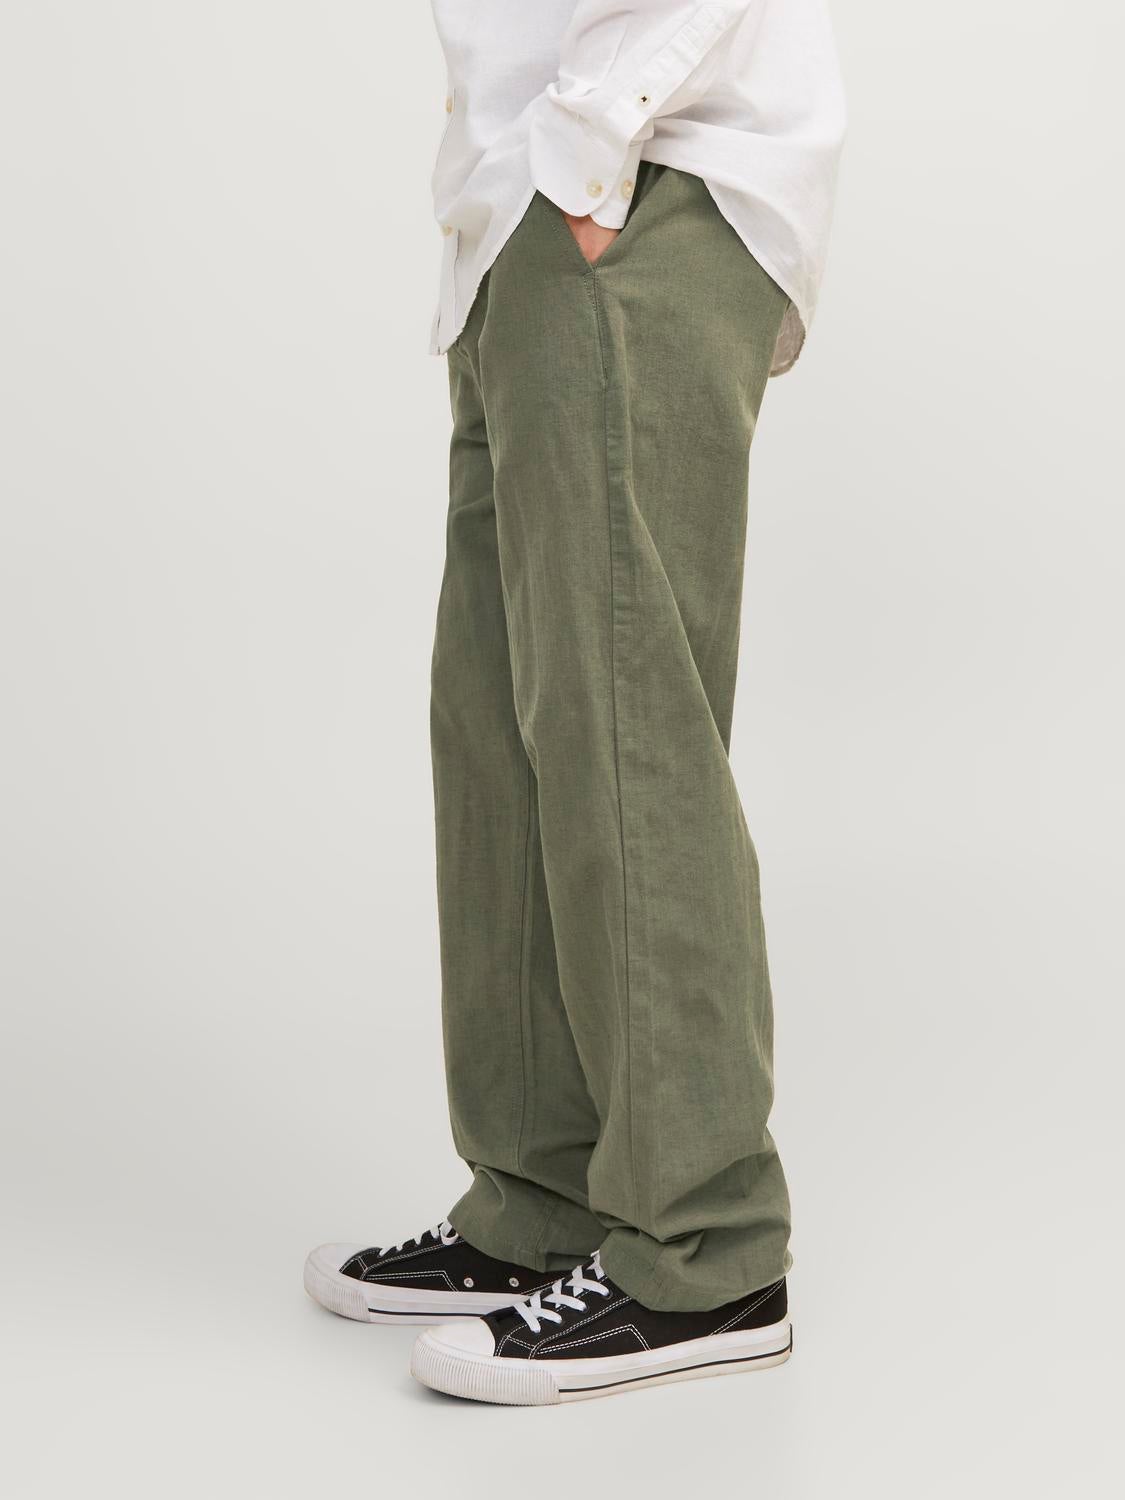 Relaxed Fit Chino pants | Jack & Jones